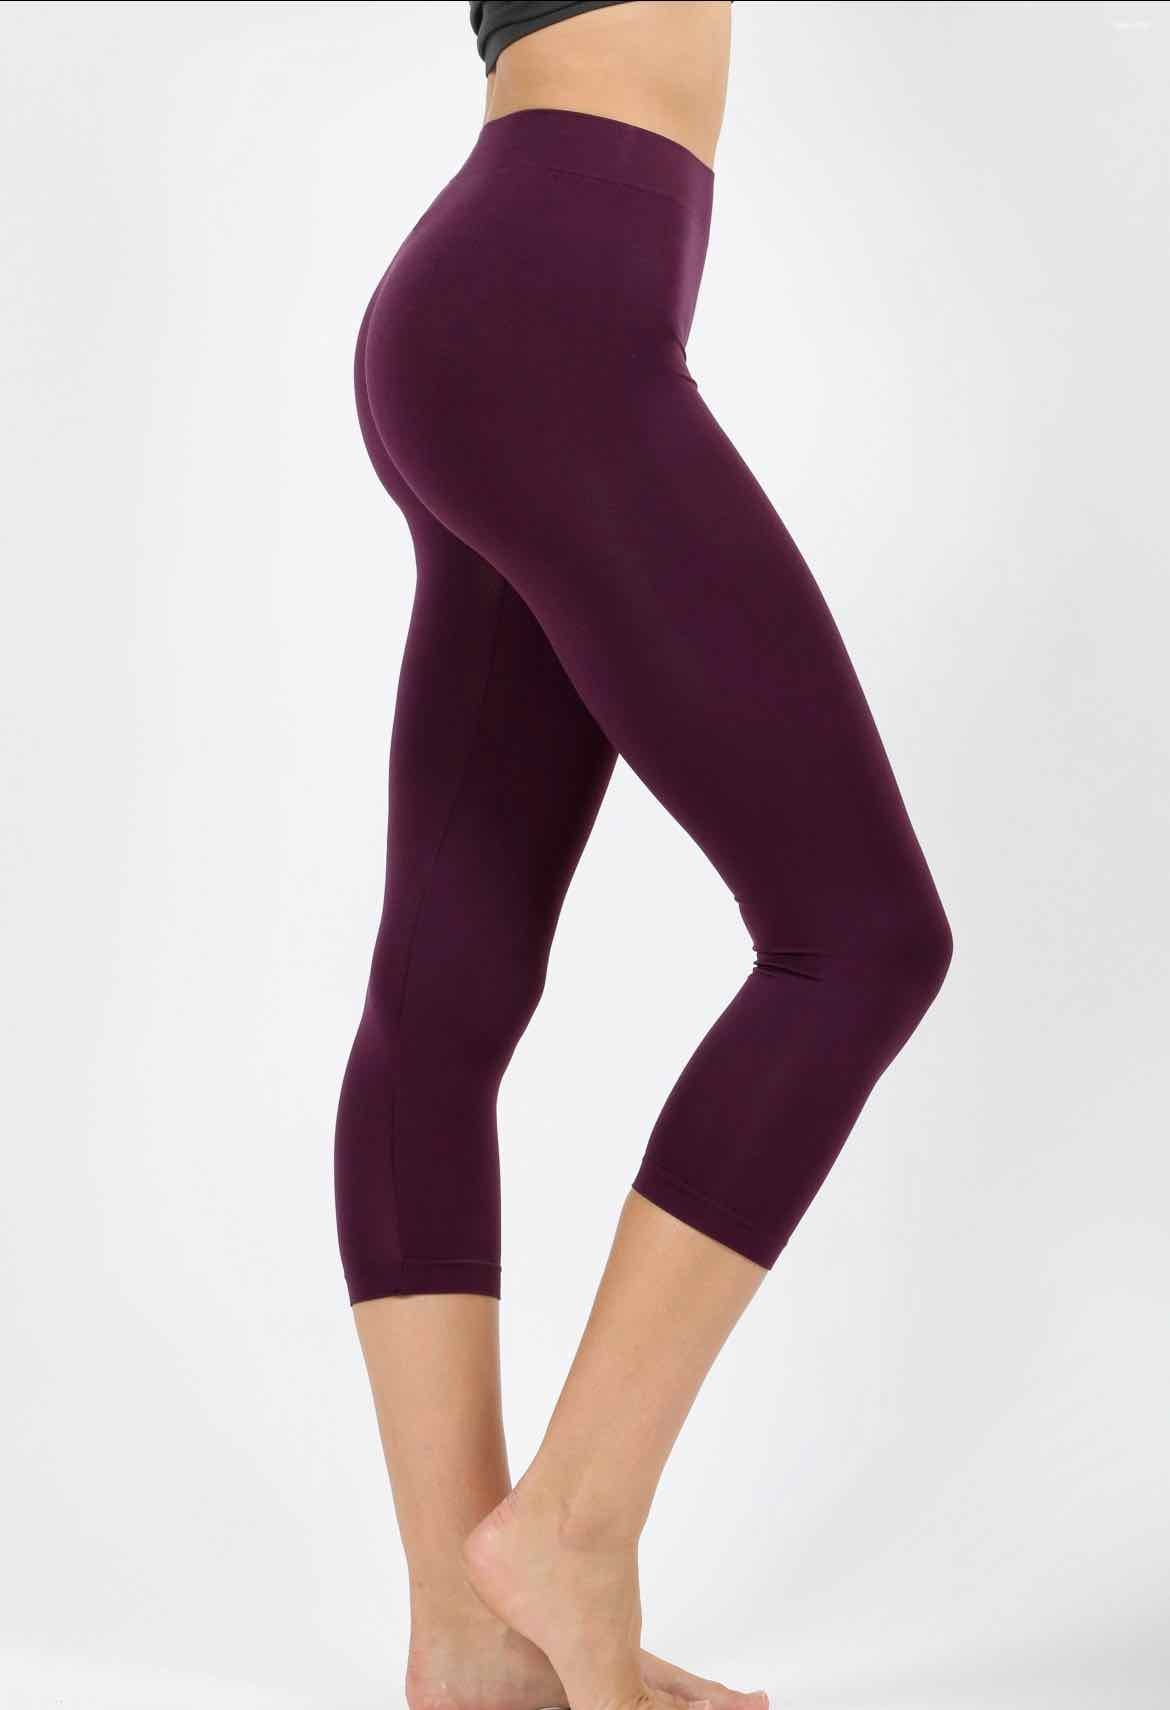 WomenSolid Tights Plus Size (Maroon)